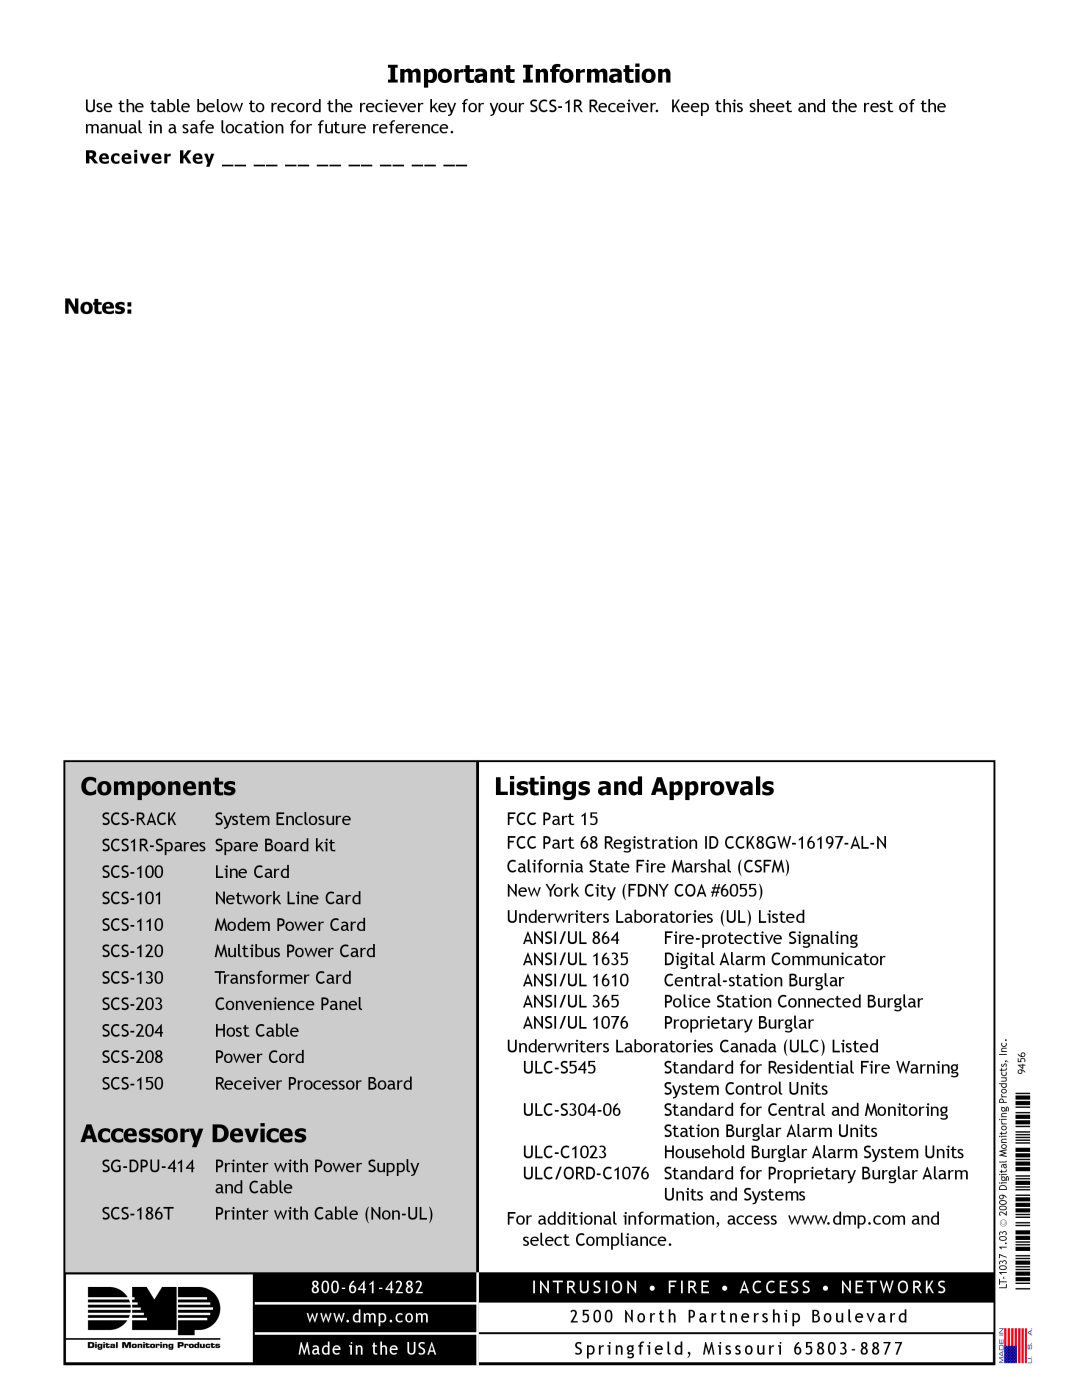 DMP Electronics SCS-1R manual Important Information, Components, Accessory Devices, Listings and Approvals 